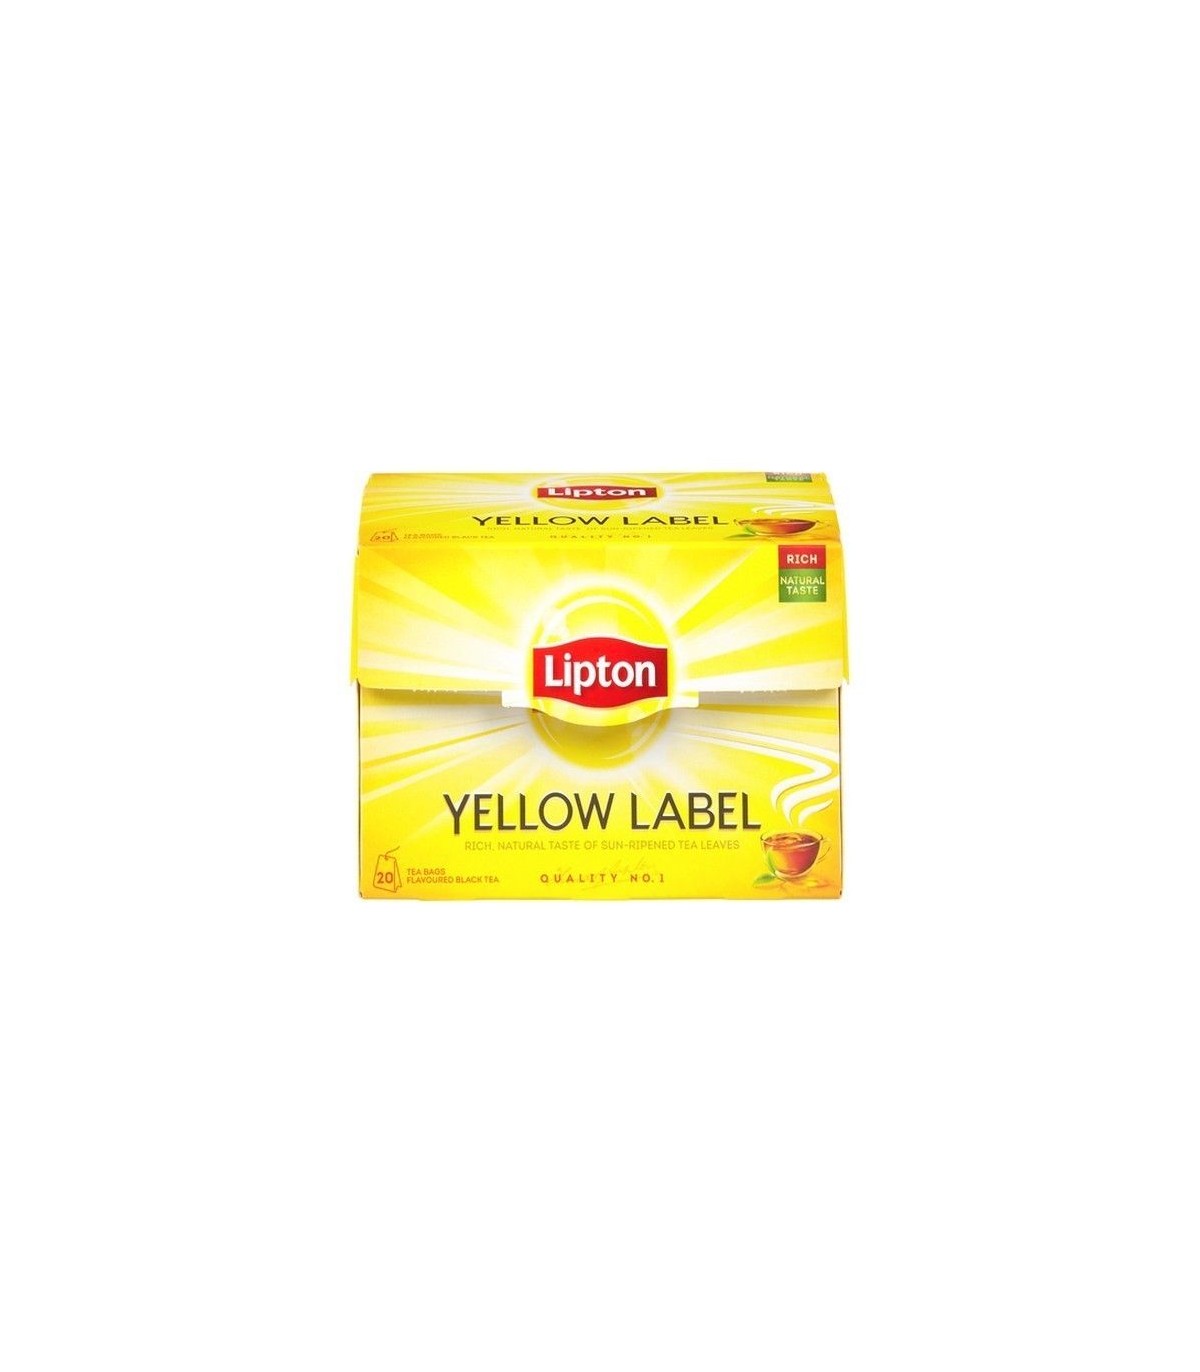 Lipton Black Tea Decaffeinated 50 pack | Ally's Basket - Direct fro...